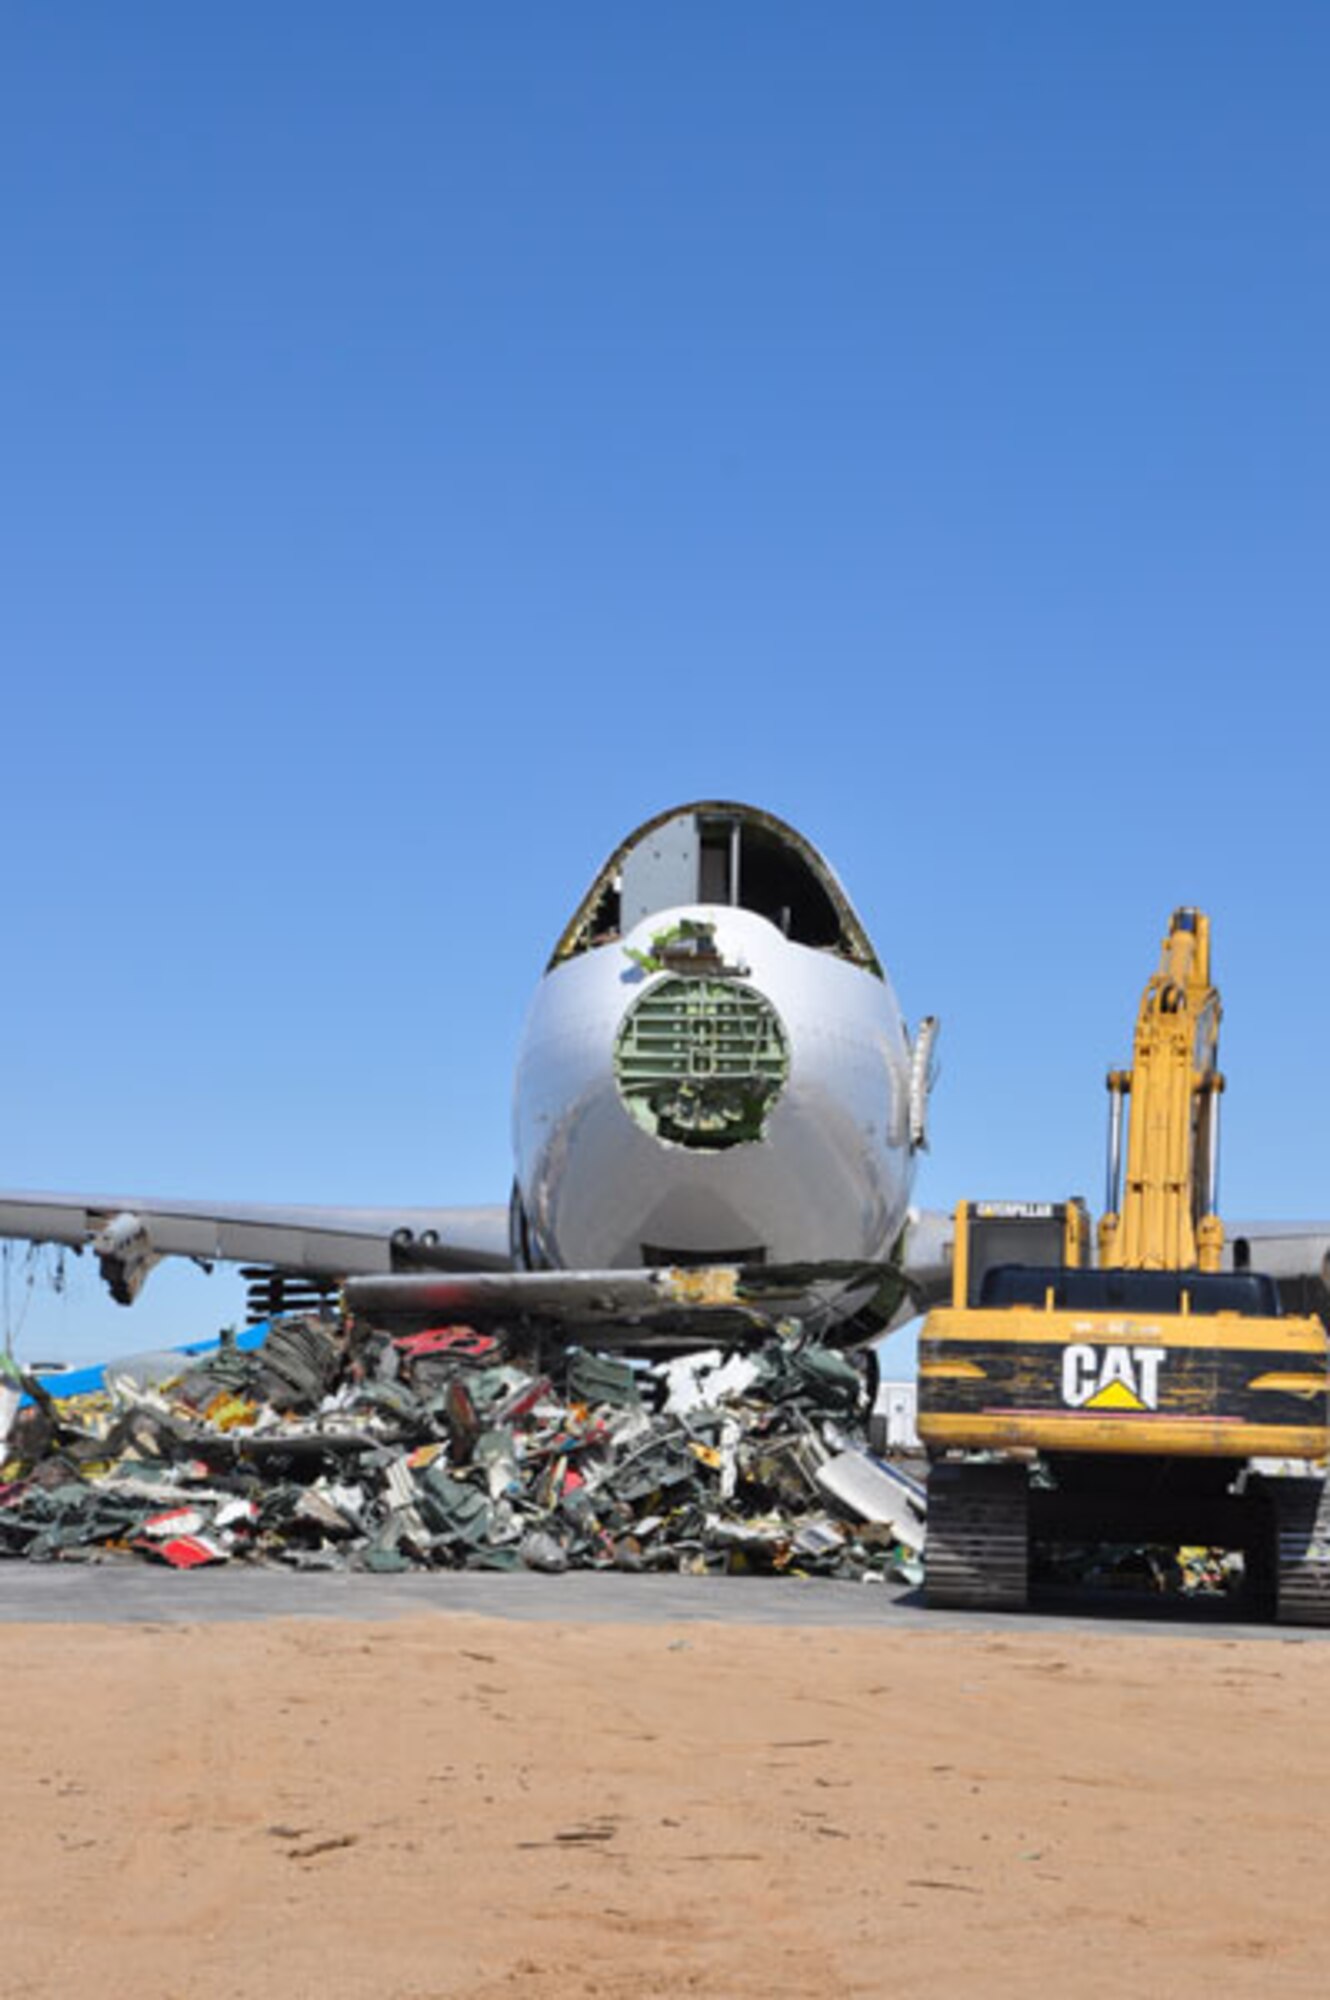 Depending on its size, a single aircraft can yield from 40,000 to 250,000 pounds of parts, according to Doug Scroggins of Aircraft Recycling Corporation.  In addition to tearing up planes, the company sells aircraft parts.  (Photo by Scott Johnston) 
